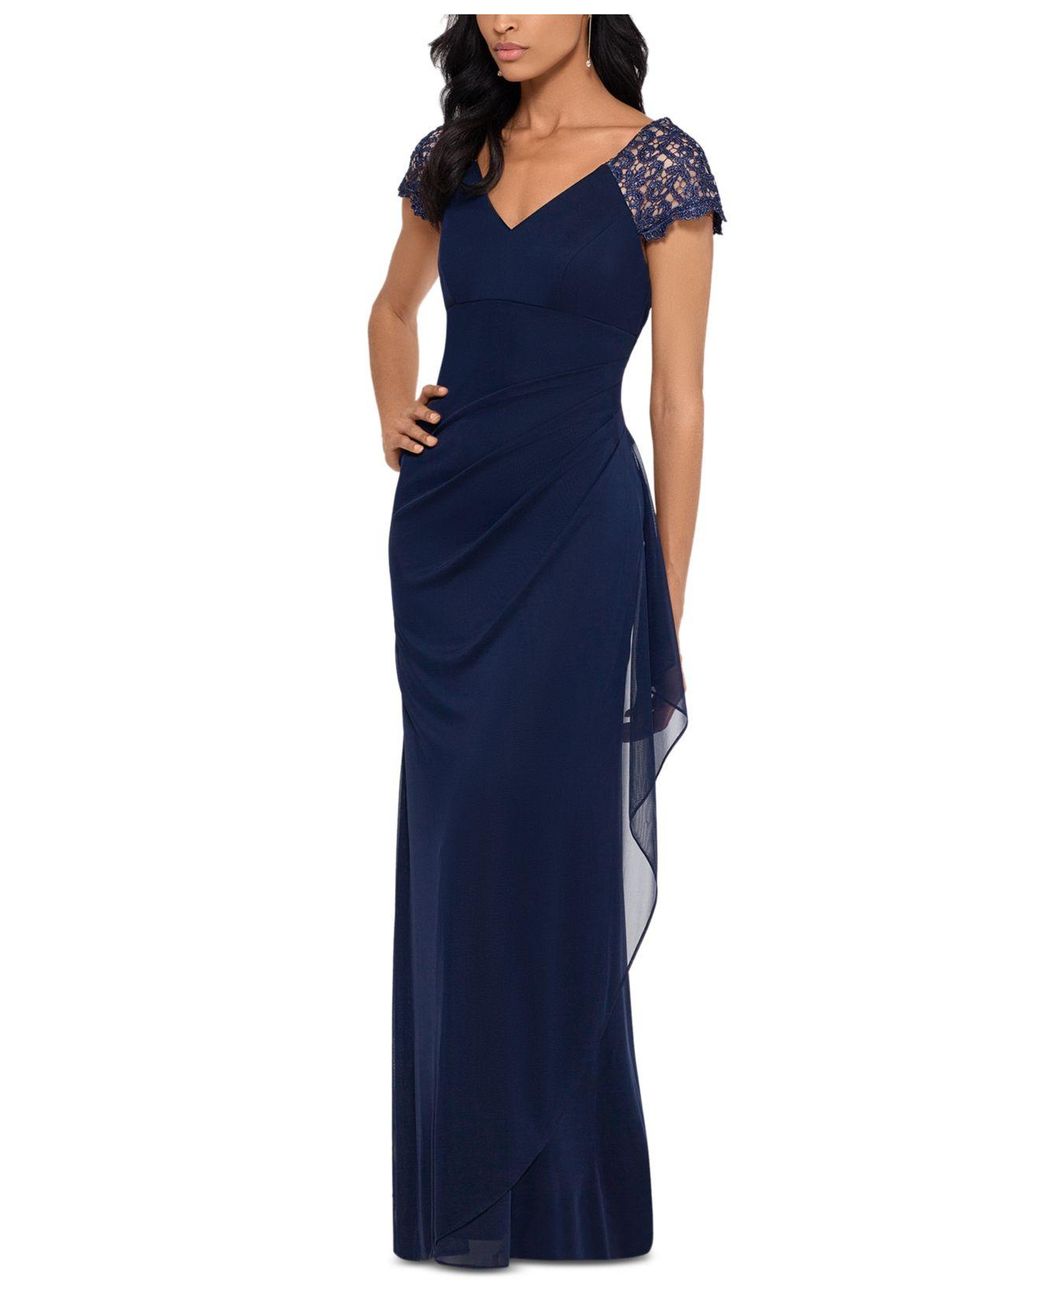 Xscape Lace-sleeve Chiffon Gown in Navy Blue (Blue) - Lyst